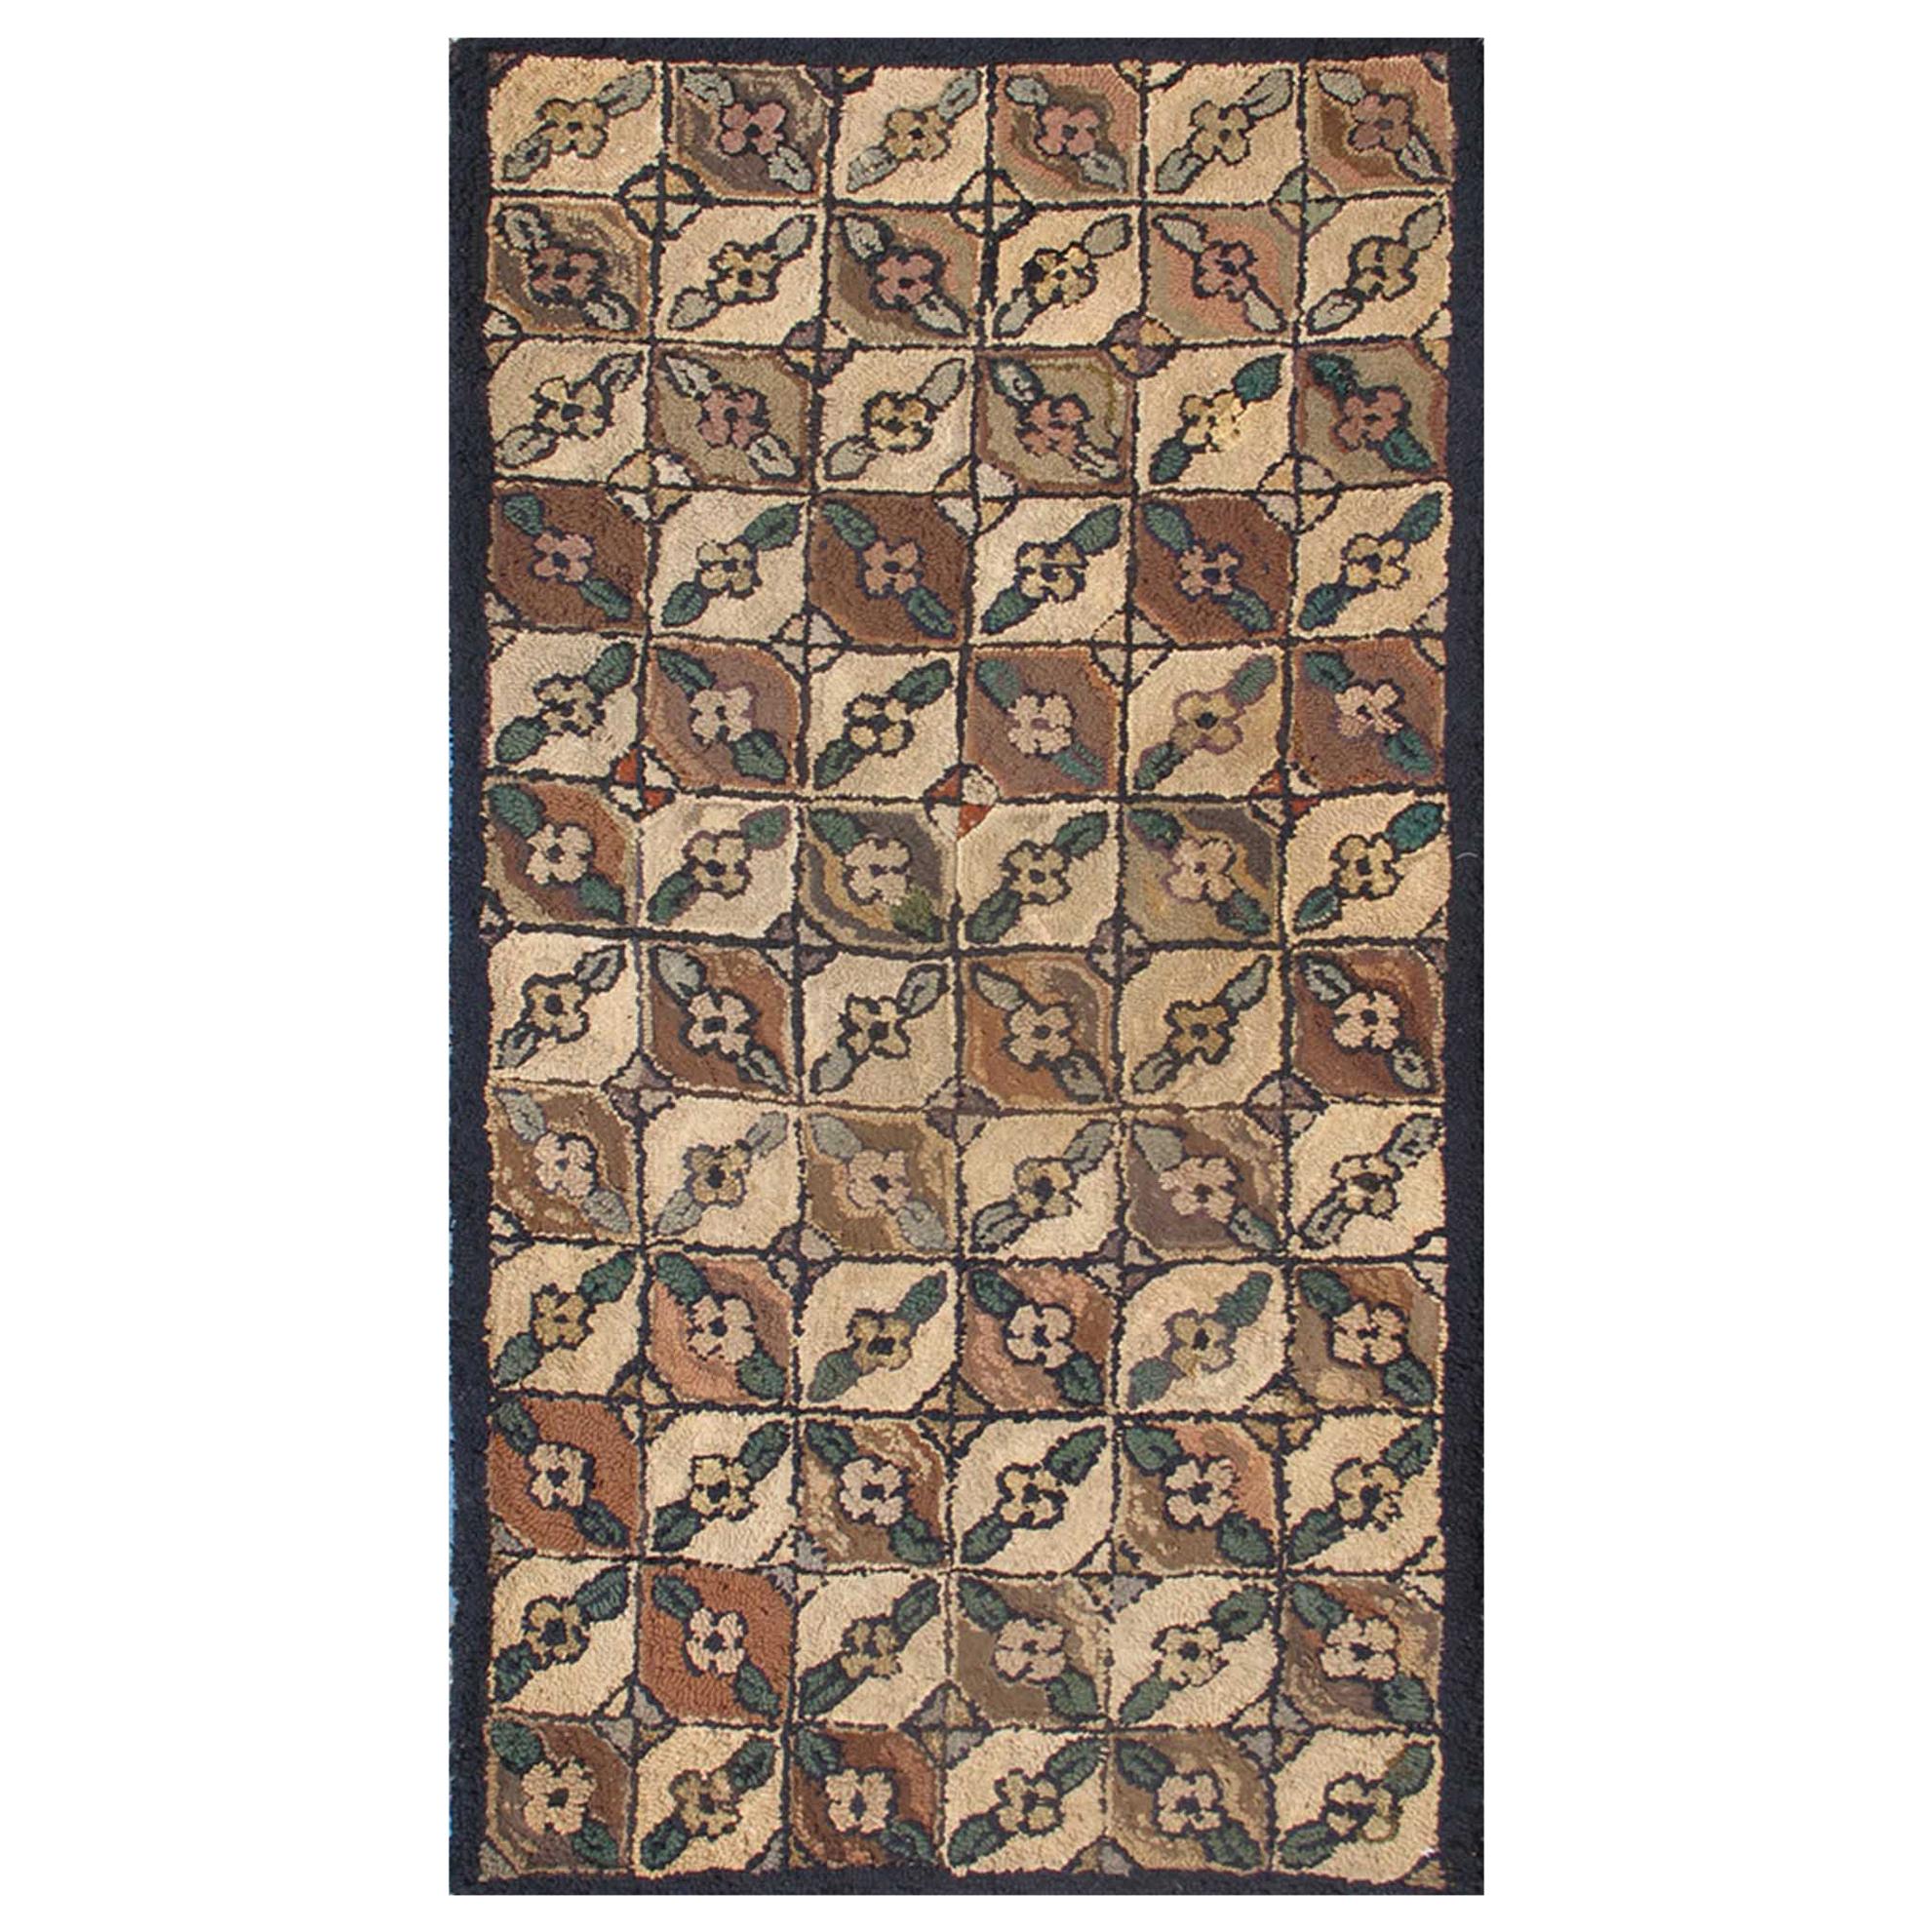 Checkered and Leaf Design American Hooked Rug in Earth Tones For Sale